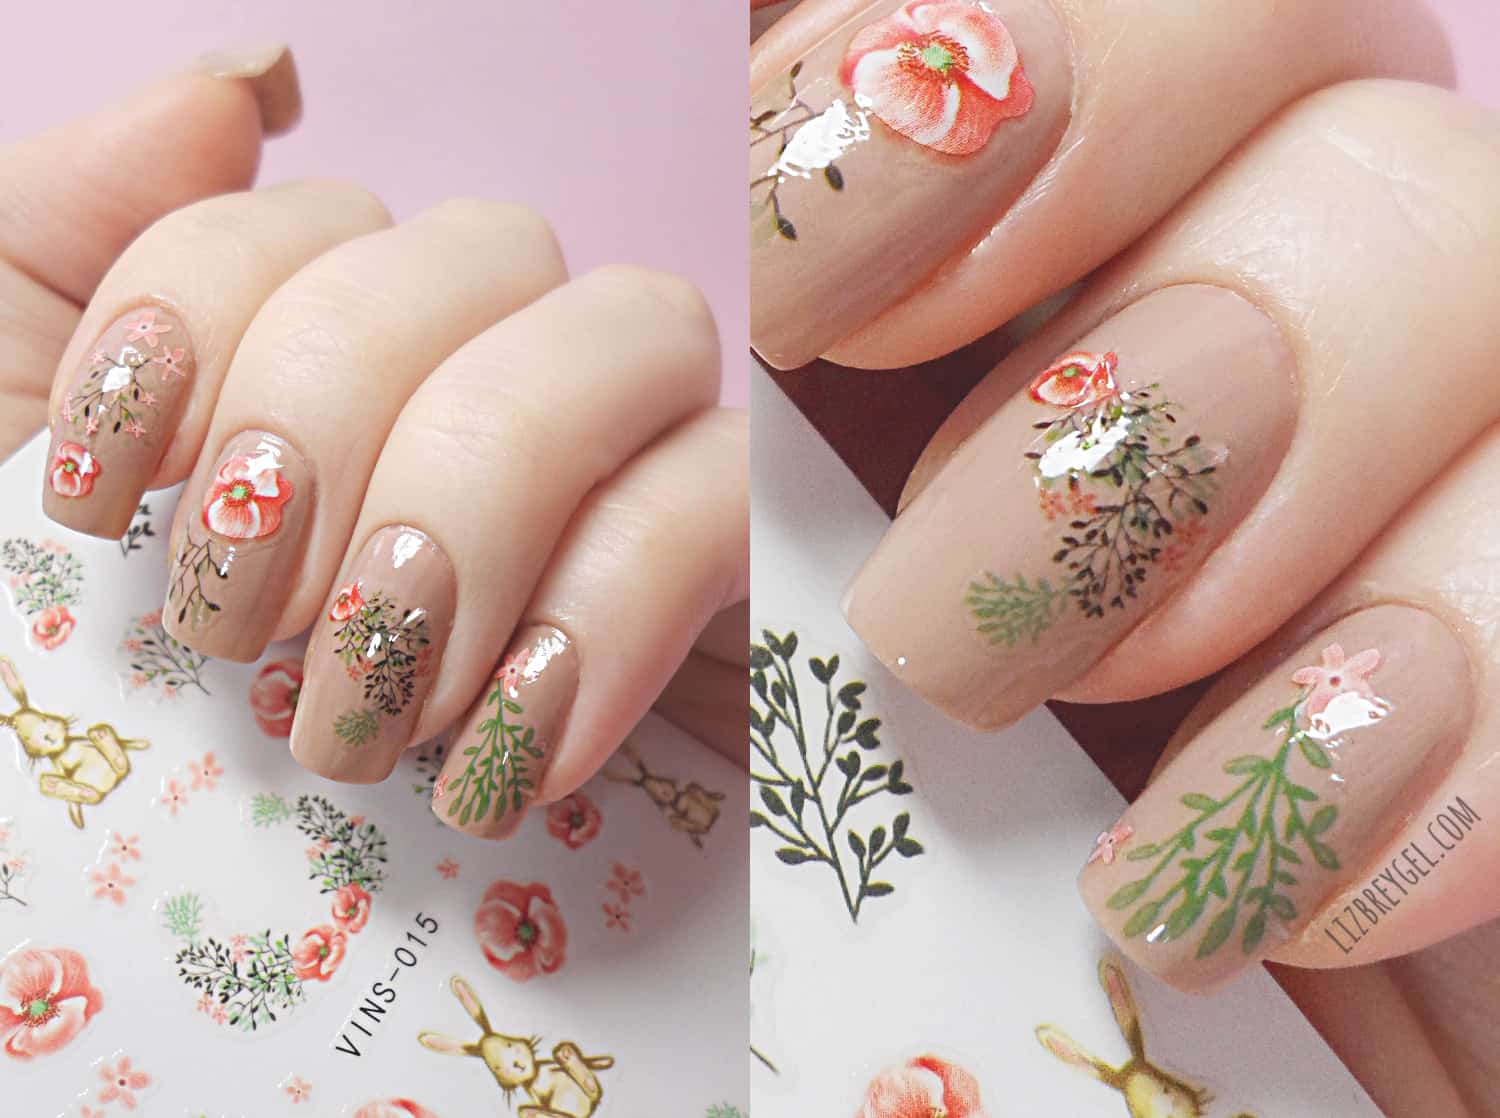 Stunning detailed floral manicure